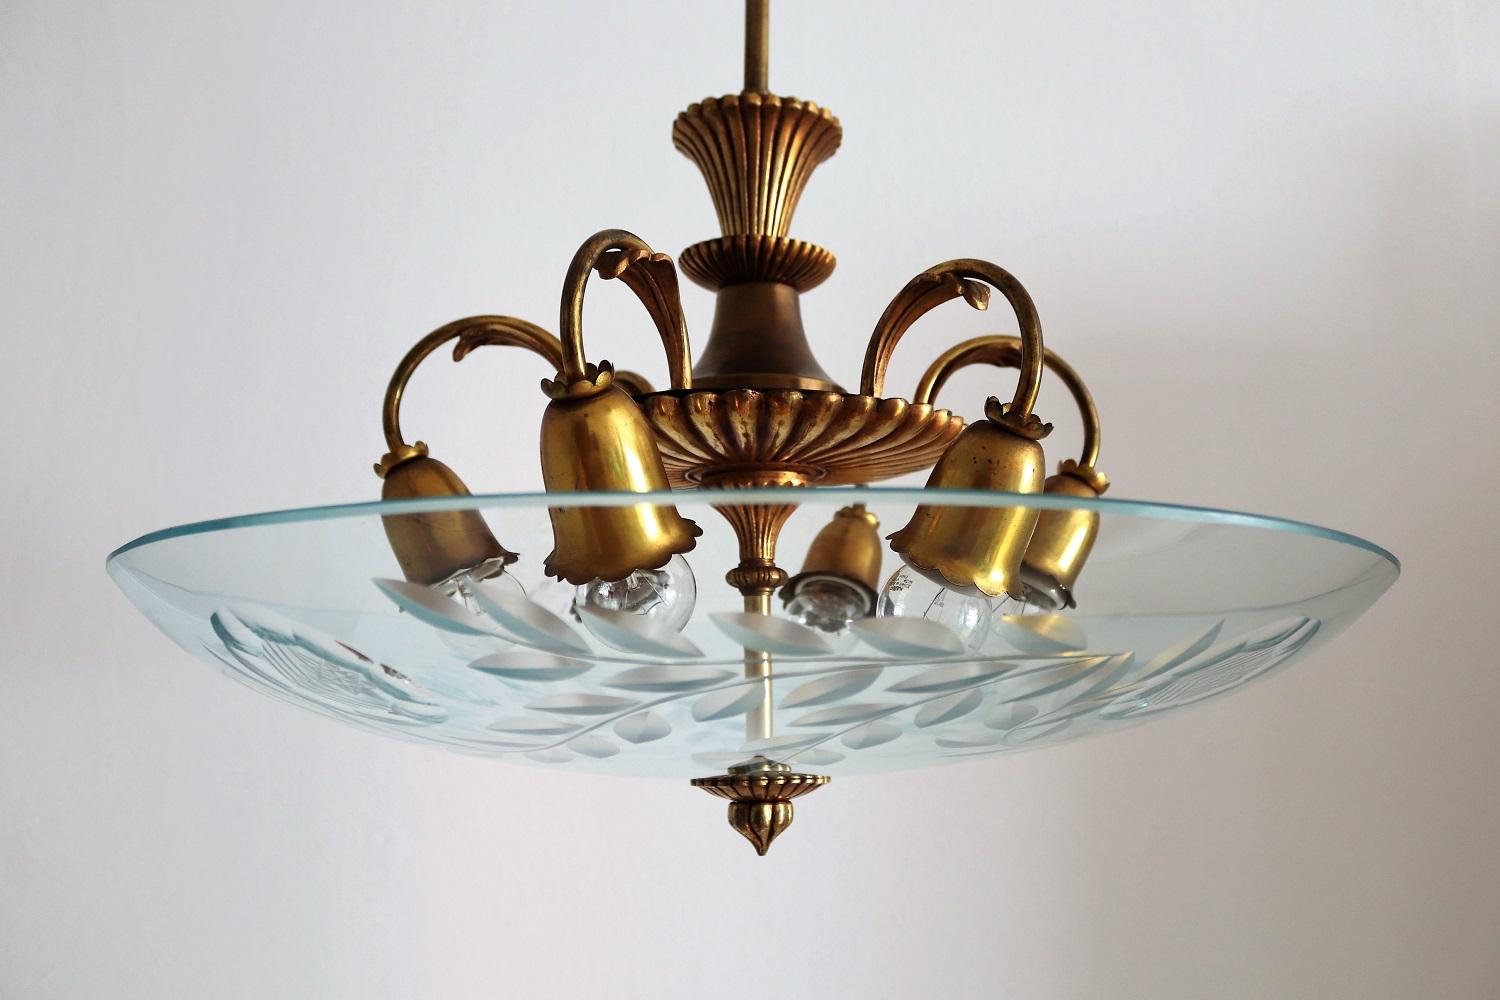 Magnificent big chandelier made of cut crystal glass and full brass lamp base.
Made in Italy in the midcentury in the style of Pietro Chiesa and Fontana Arte chandeliers.
The glass is beautifully cut and without defects.
The lamps base made of full